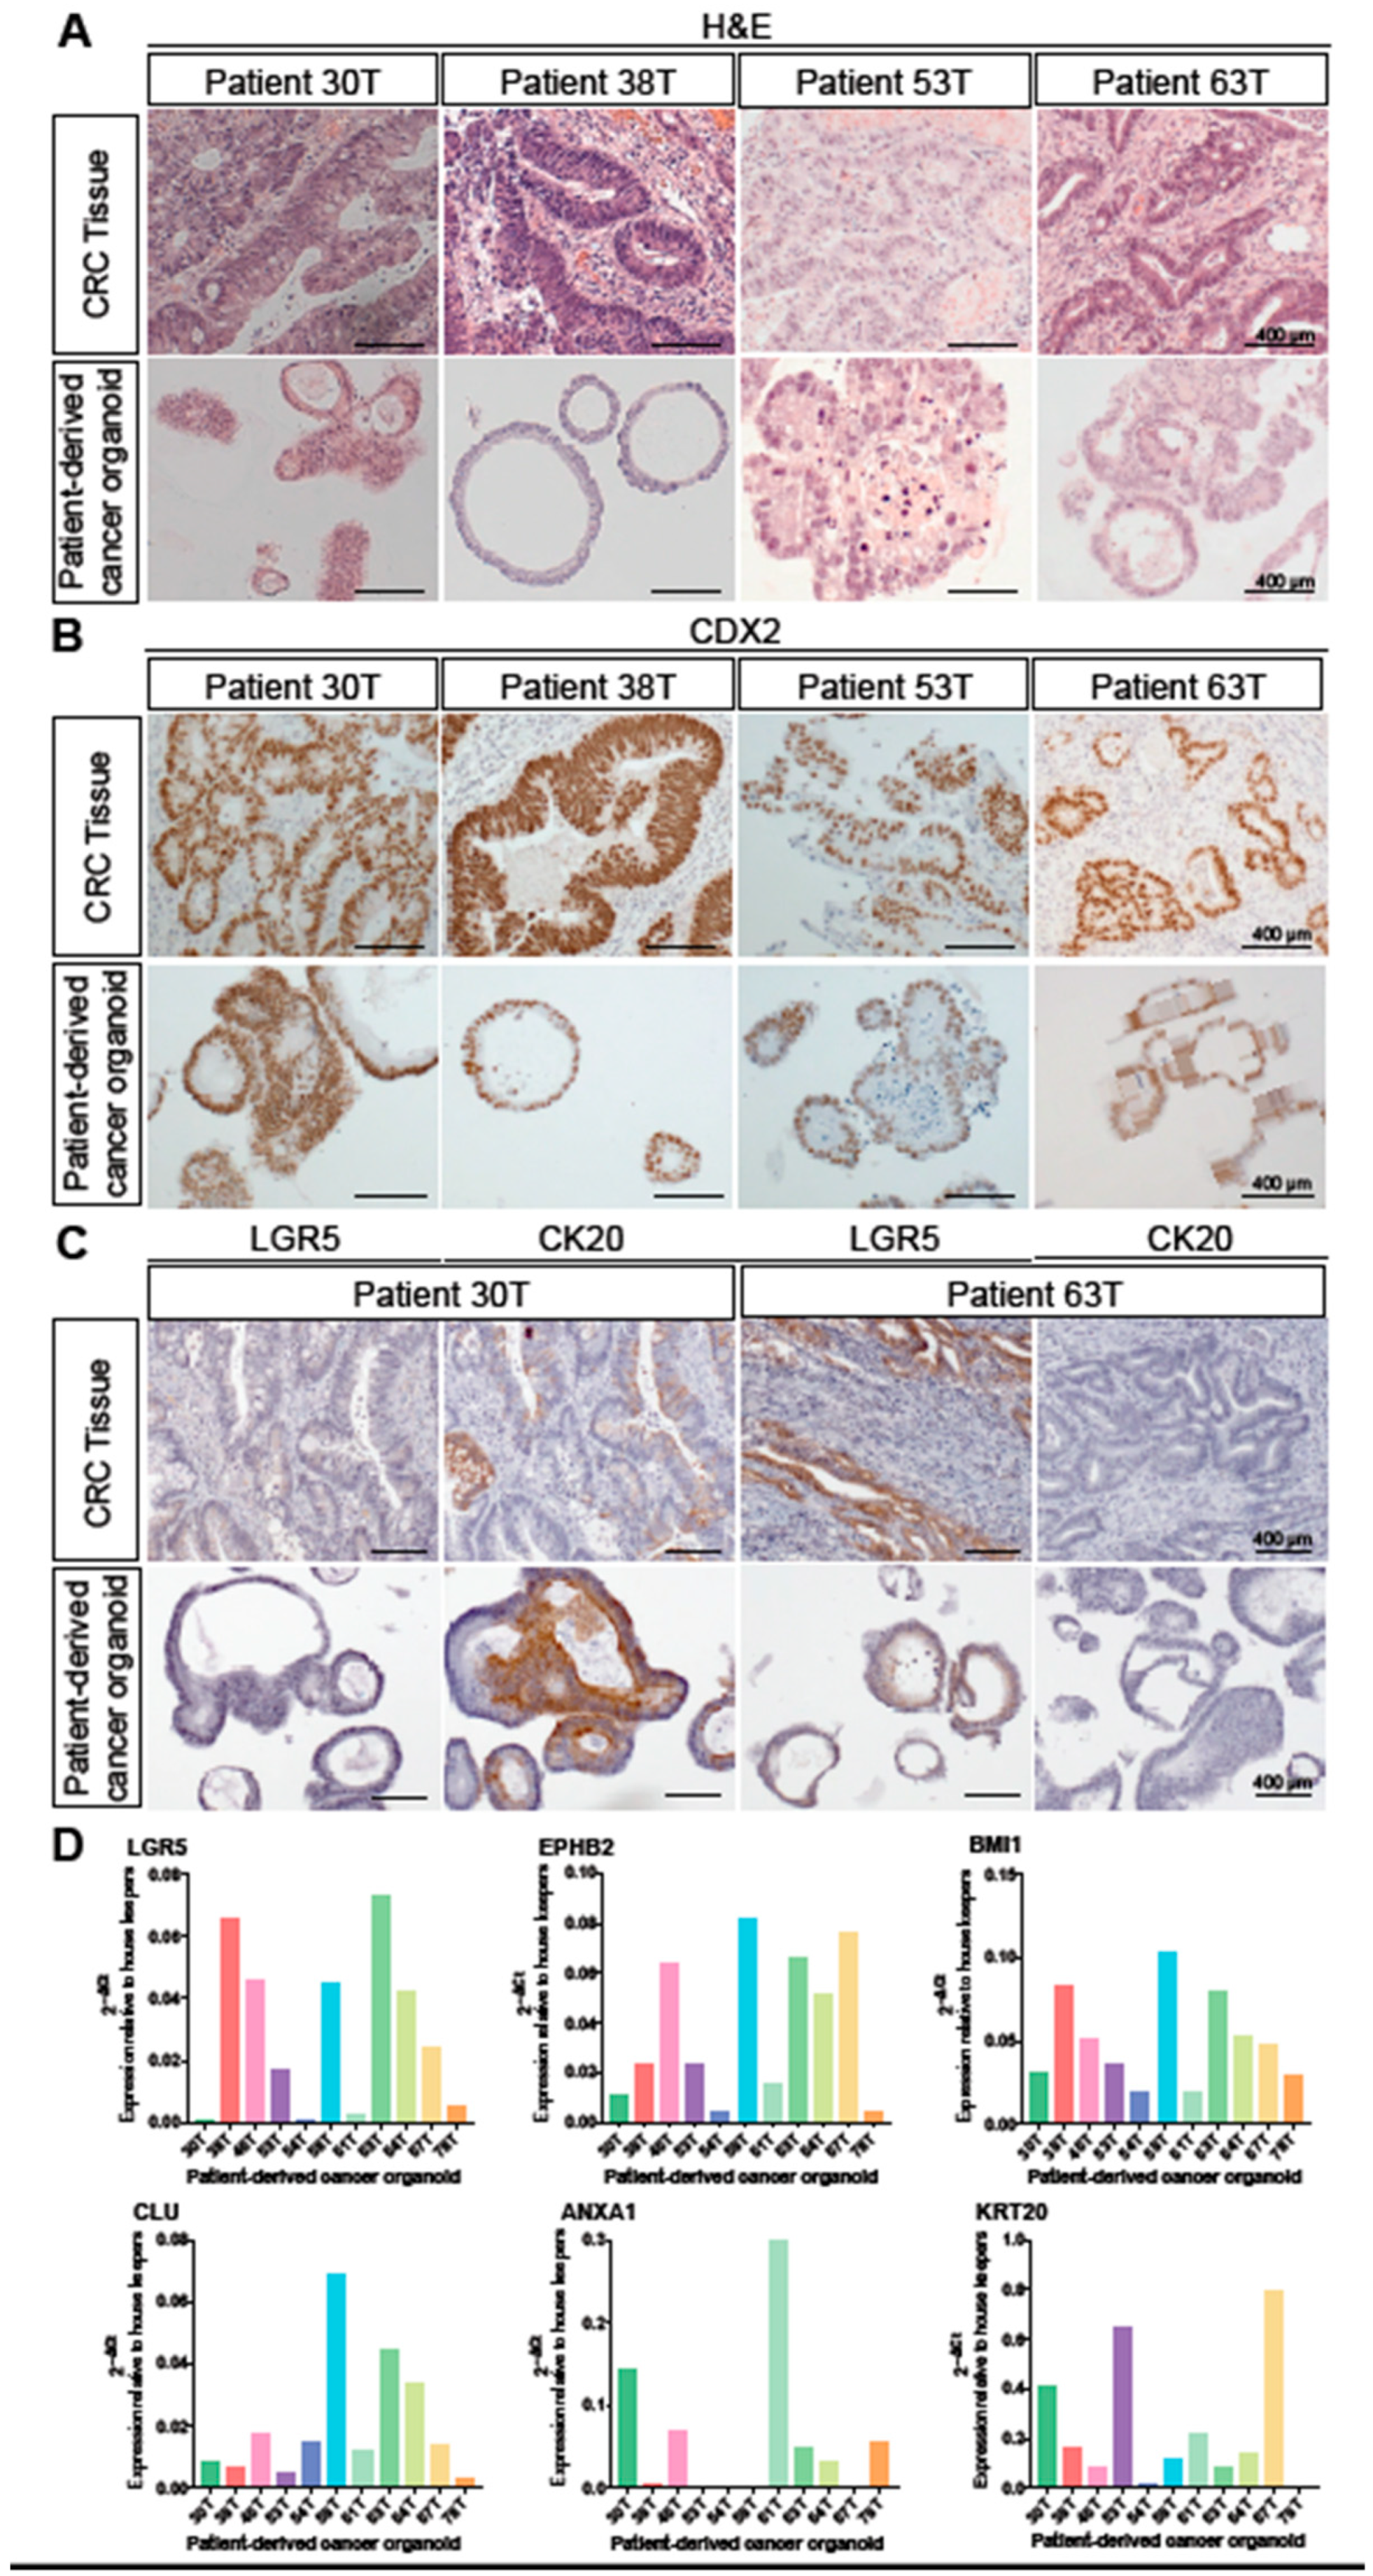 Organoid Culture of Isolated Cells from Patient-derived Tissues with Colorectal Cancer.